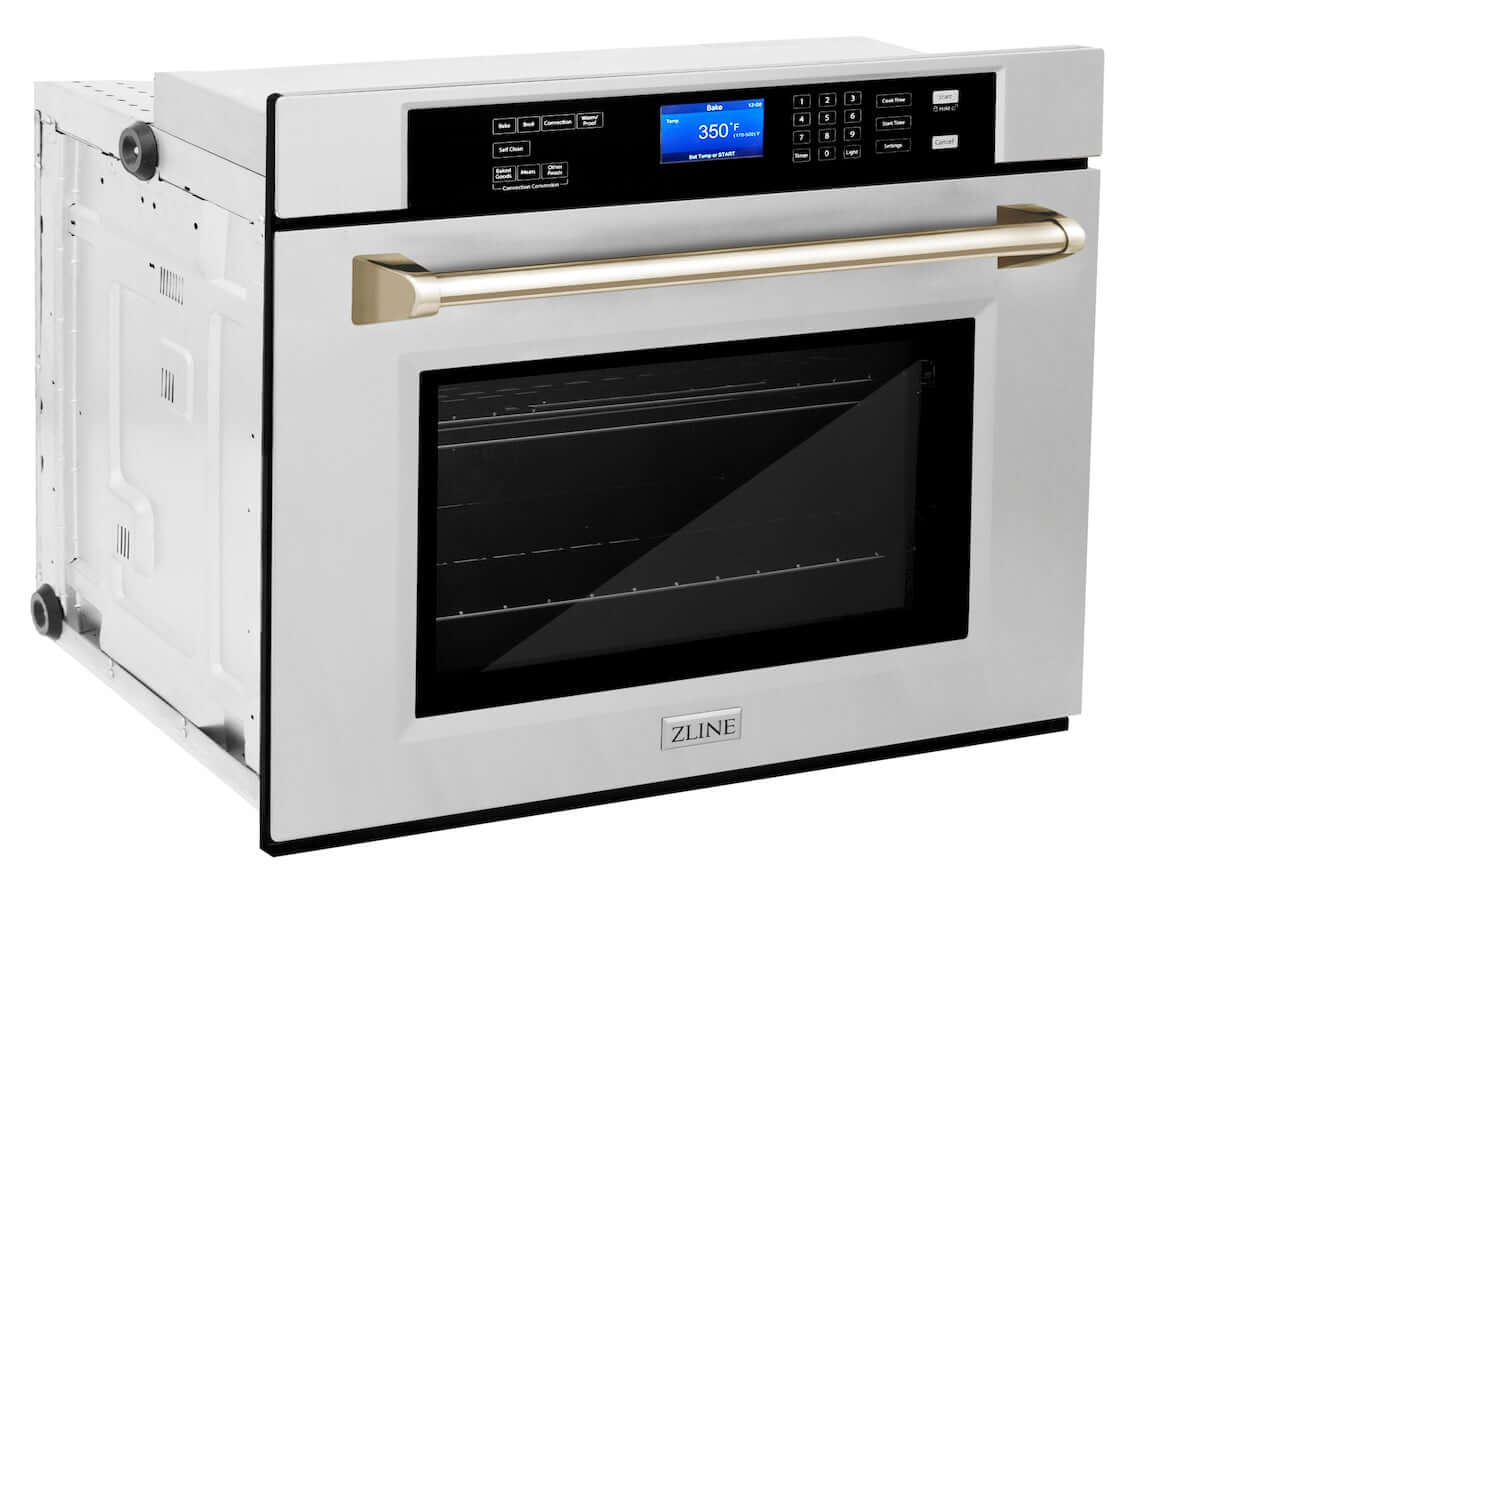 ZLINE Autograph Edition 30 in. Electric Single Wall Oven with Self Clean and True Convection in Stainless Steel and Polished Gold Accents (AWSZ-30-G)